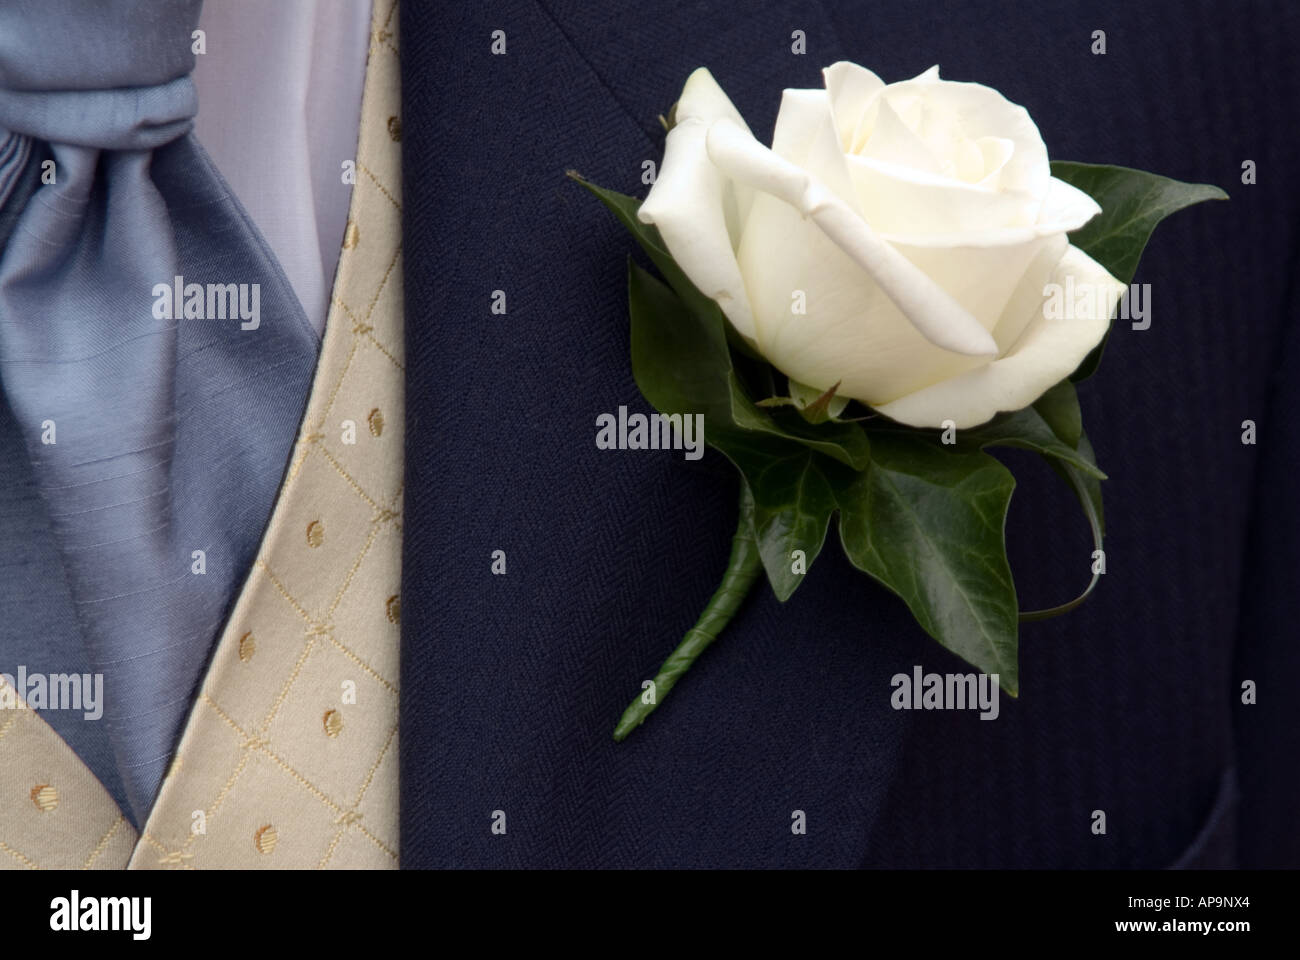 The groom's outfit at a wedding with white rose flower in jacket button hole Stock Photo